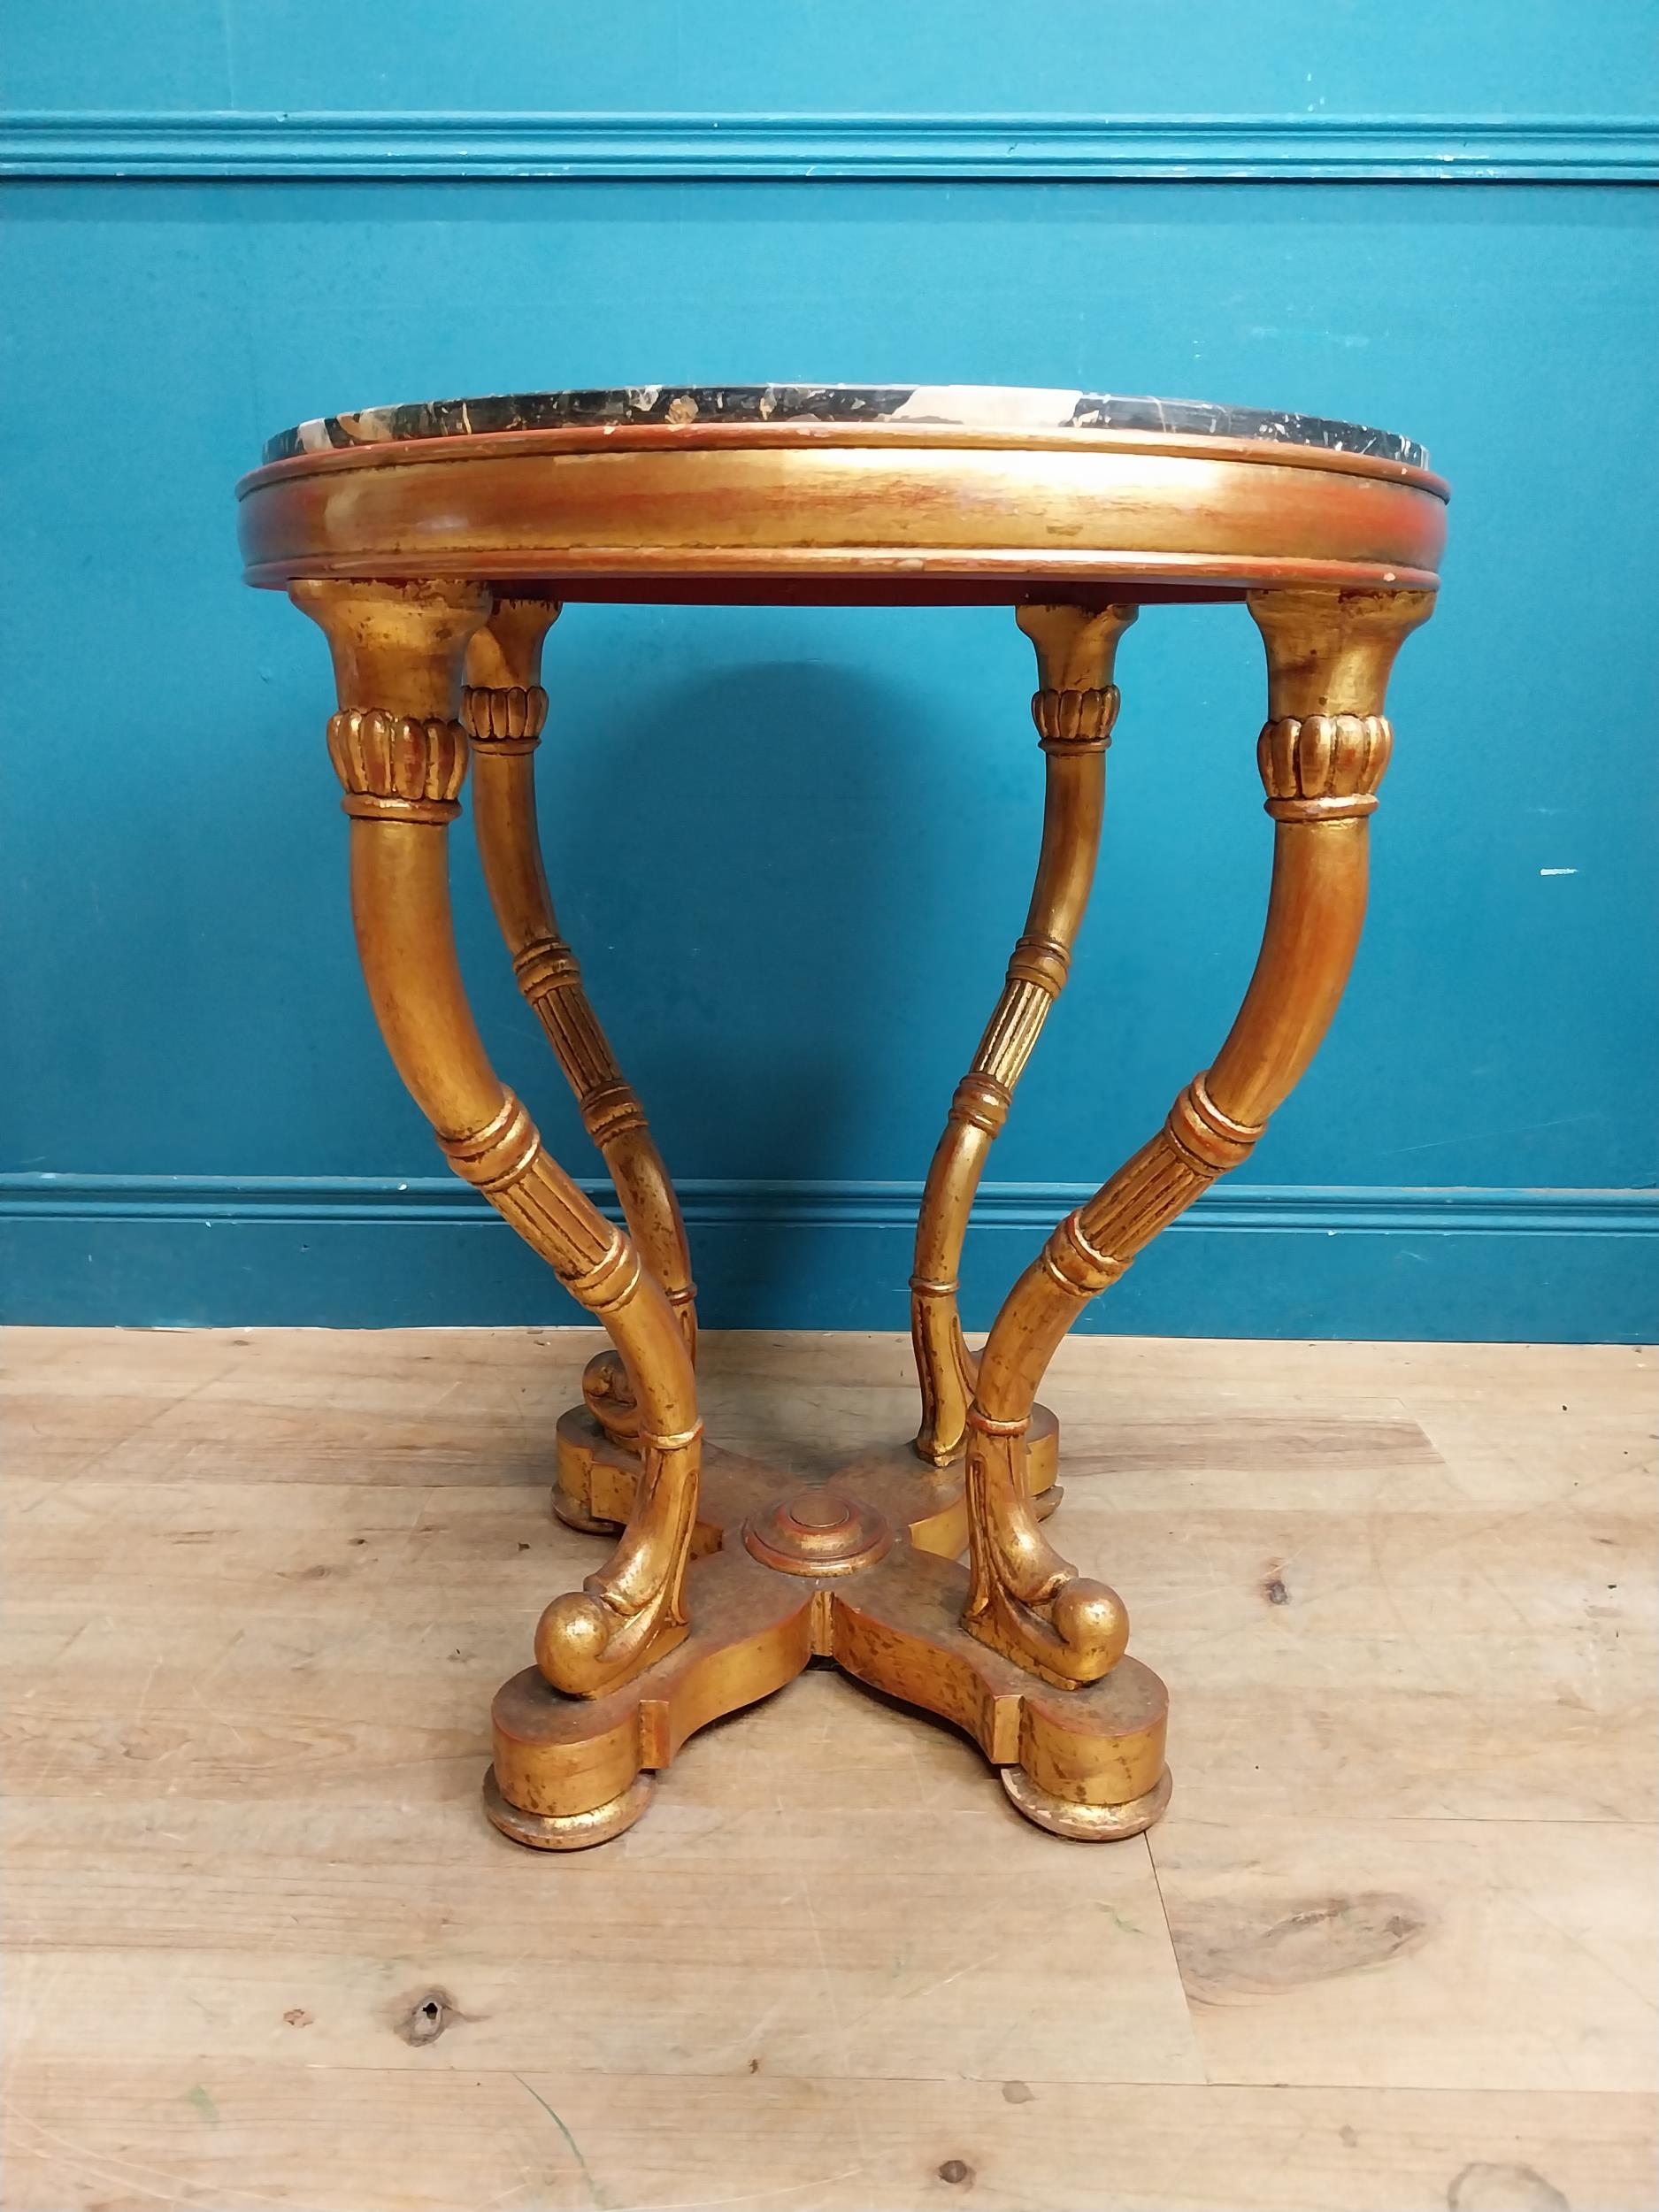 Decorative giltwood centre table with marble top raised on four shaped legs and x-frame platform - Image 6 of 7